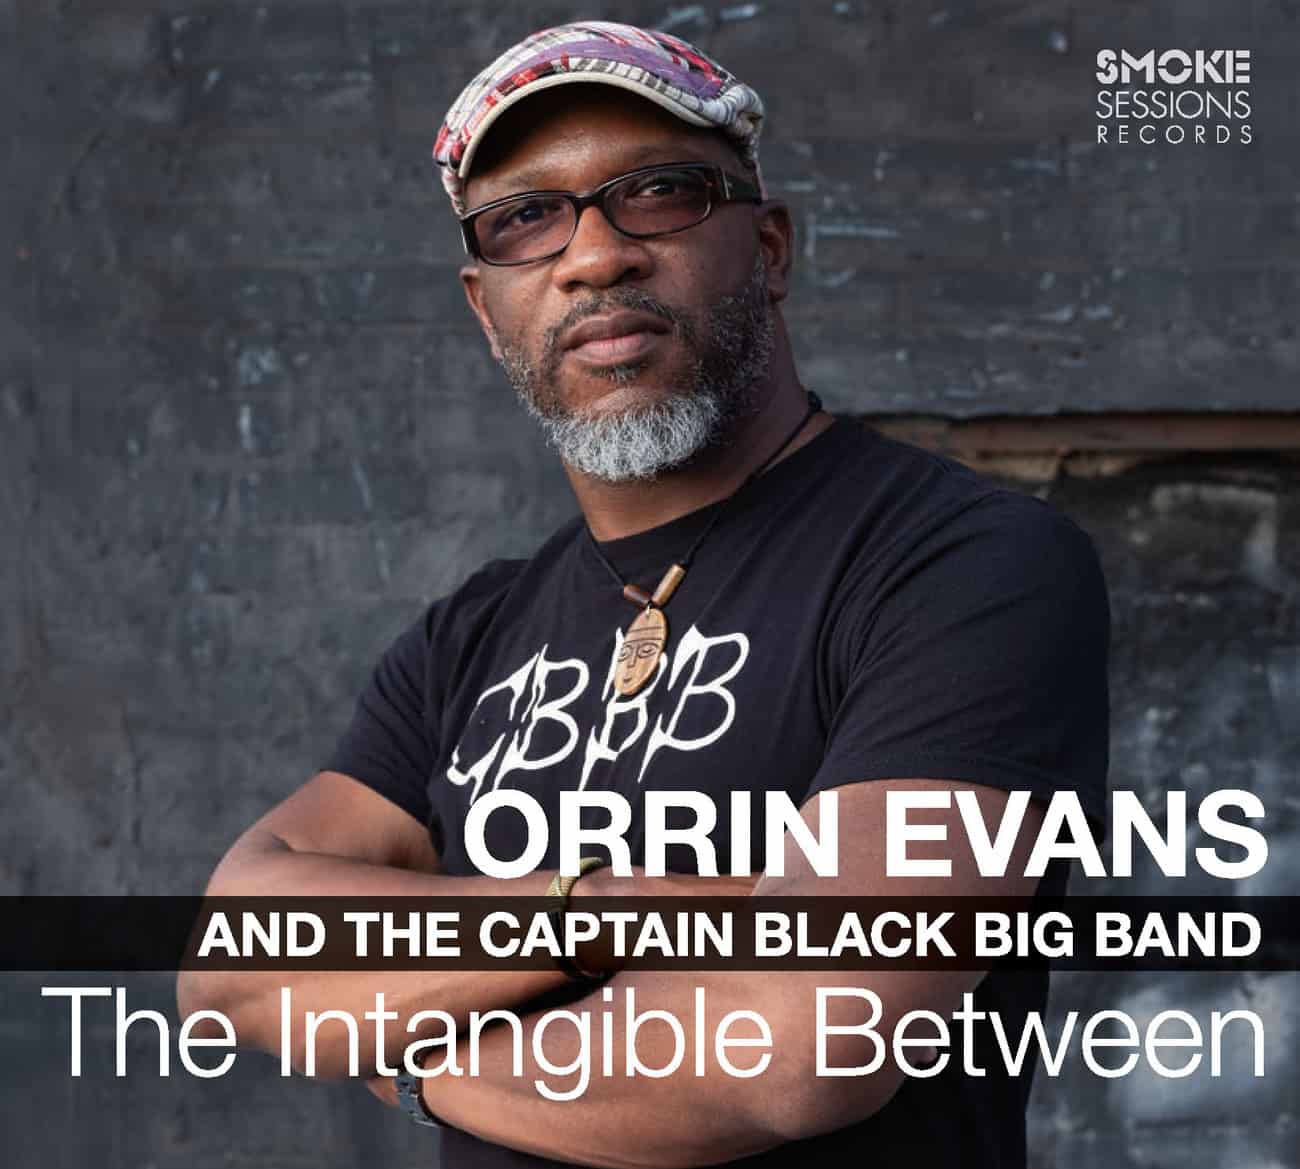 Orrin Evans CBBB THE INTANGIBLE BETWEEN_Cover WEB